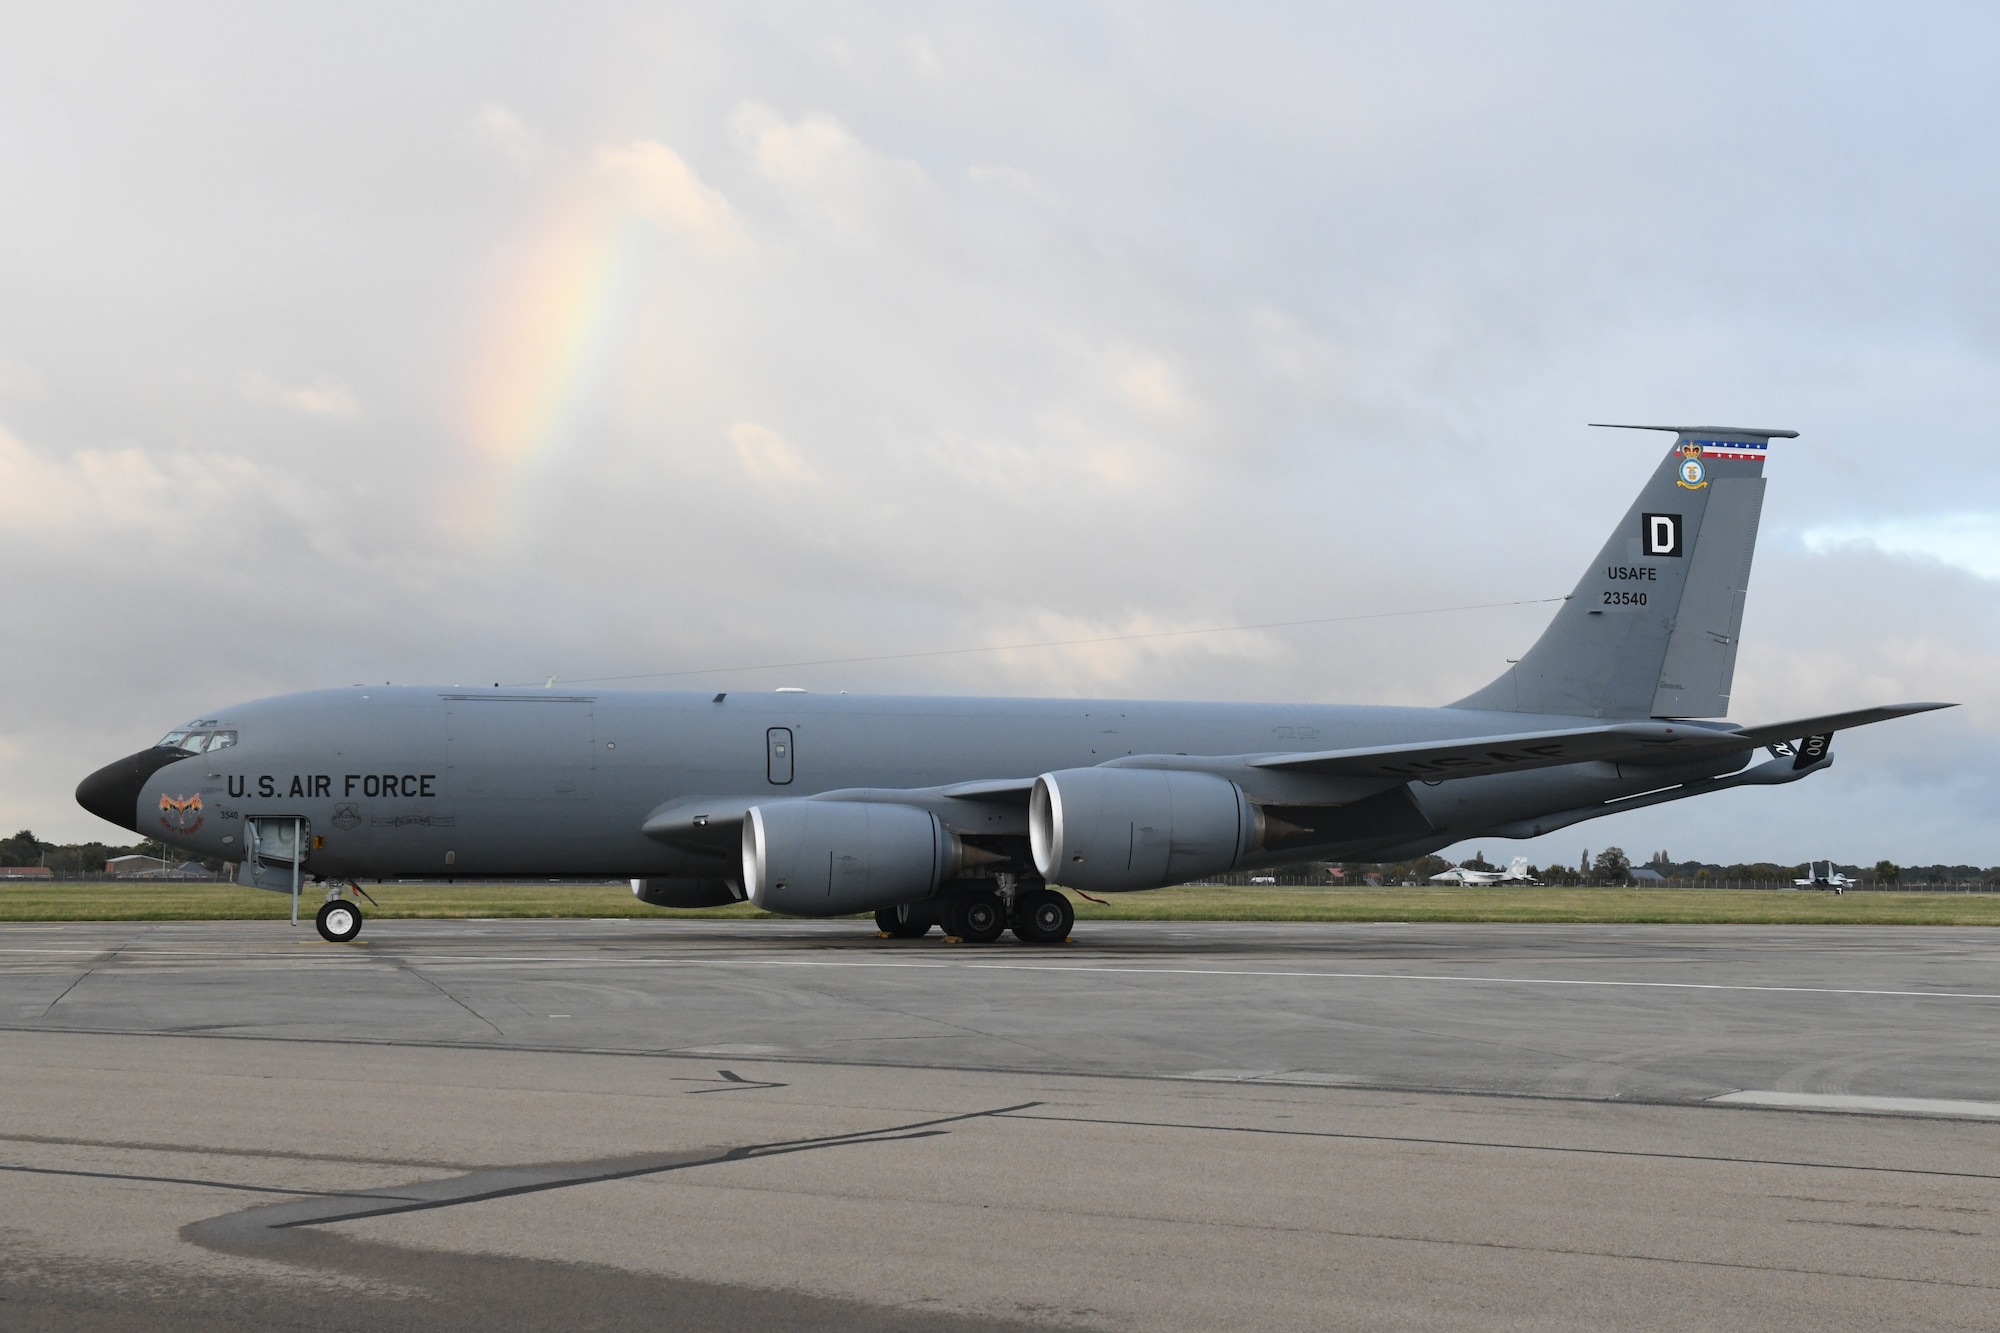 A KC-135 Stratotanker aircraft assigned to the 100th Air Refueling Wing sits on the flightline during a readiness exercise at Royal Air Force Mildenhall, England, Nov. 4, 2021. The aircraft mishap was part of a readiness exercise that allowed emergency service personnel to practice how they would respond in a real life incident. (U.S. Air Force photo by Tech. Sgt. Anthony Hetlage)